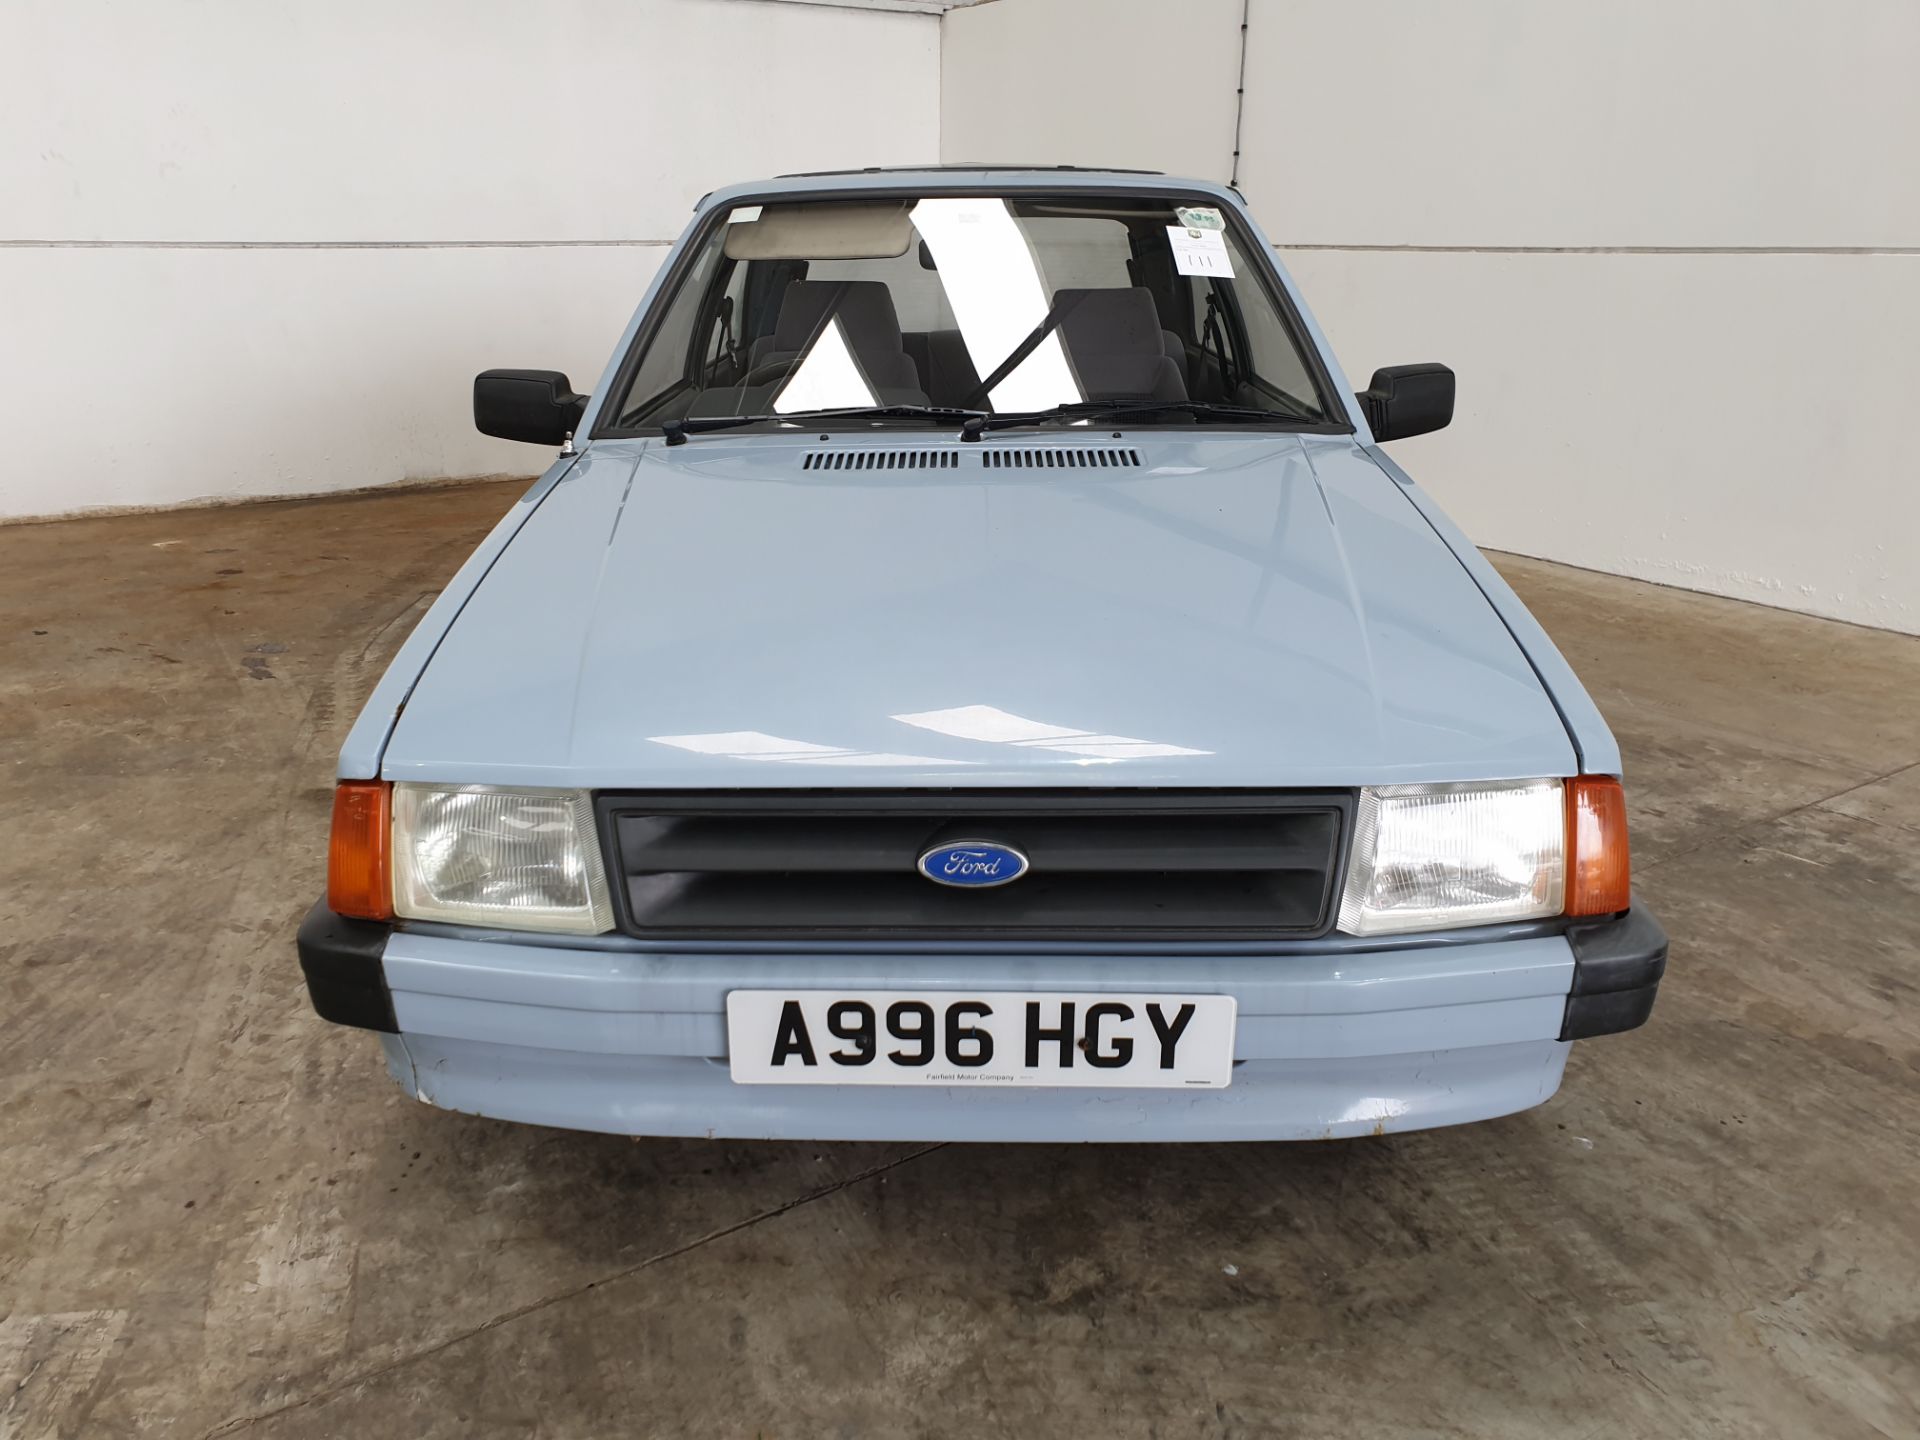 1984 Ford Escort 1100 3dr - Image 8 of 14